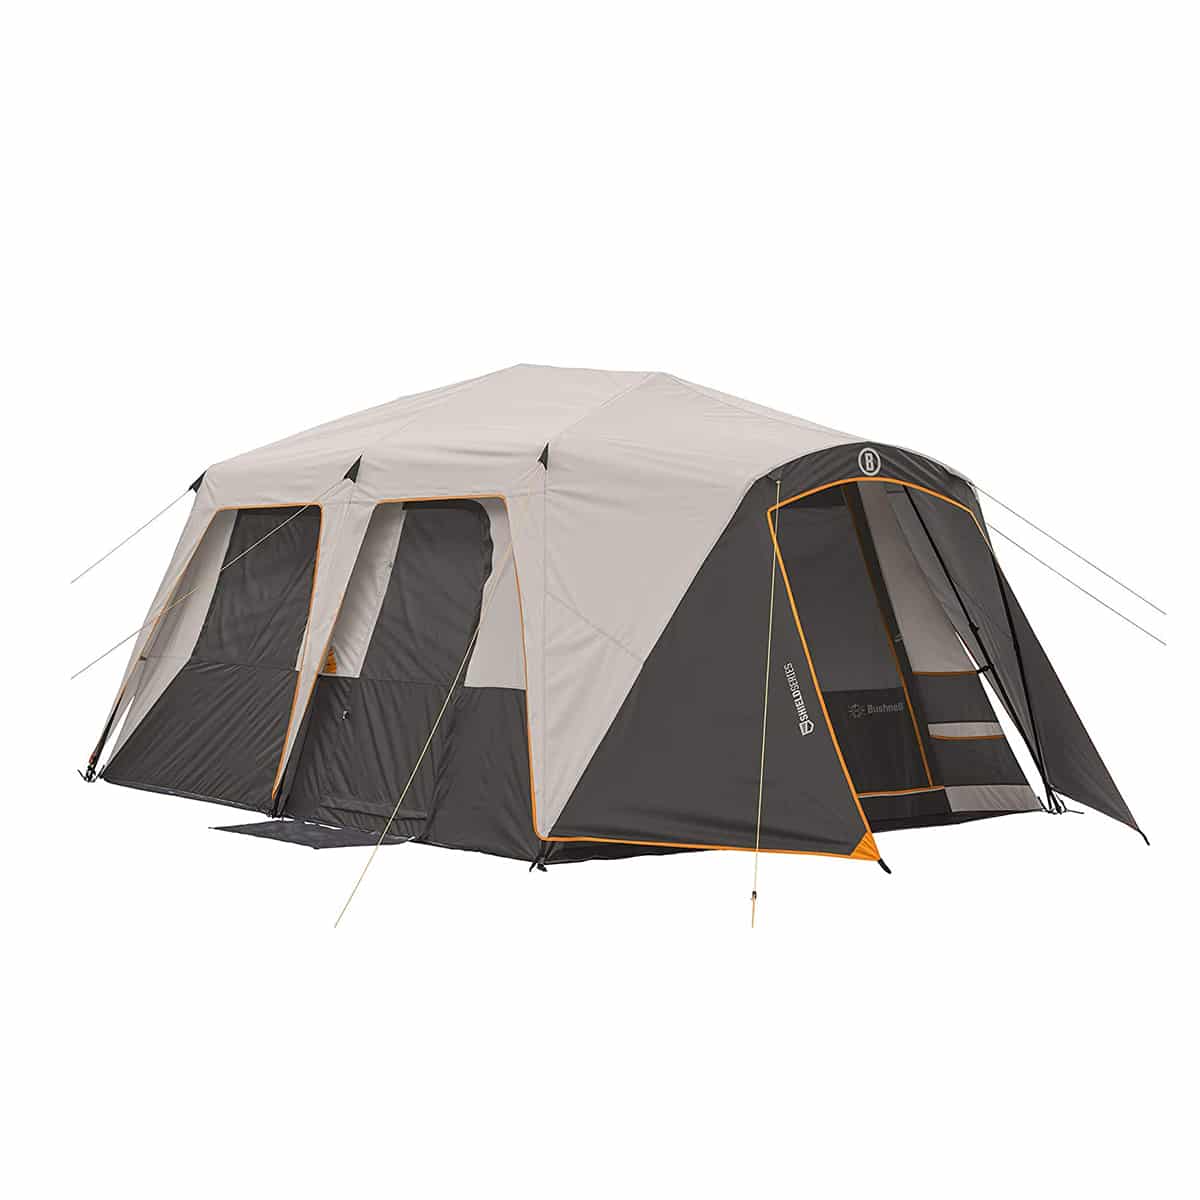 Top 10 Best Dome Tents in 2021 Reviews - Go On Products